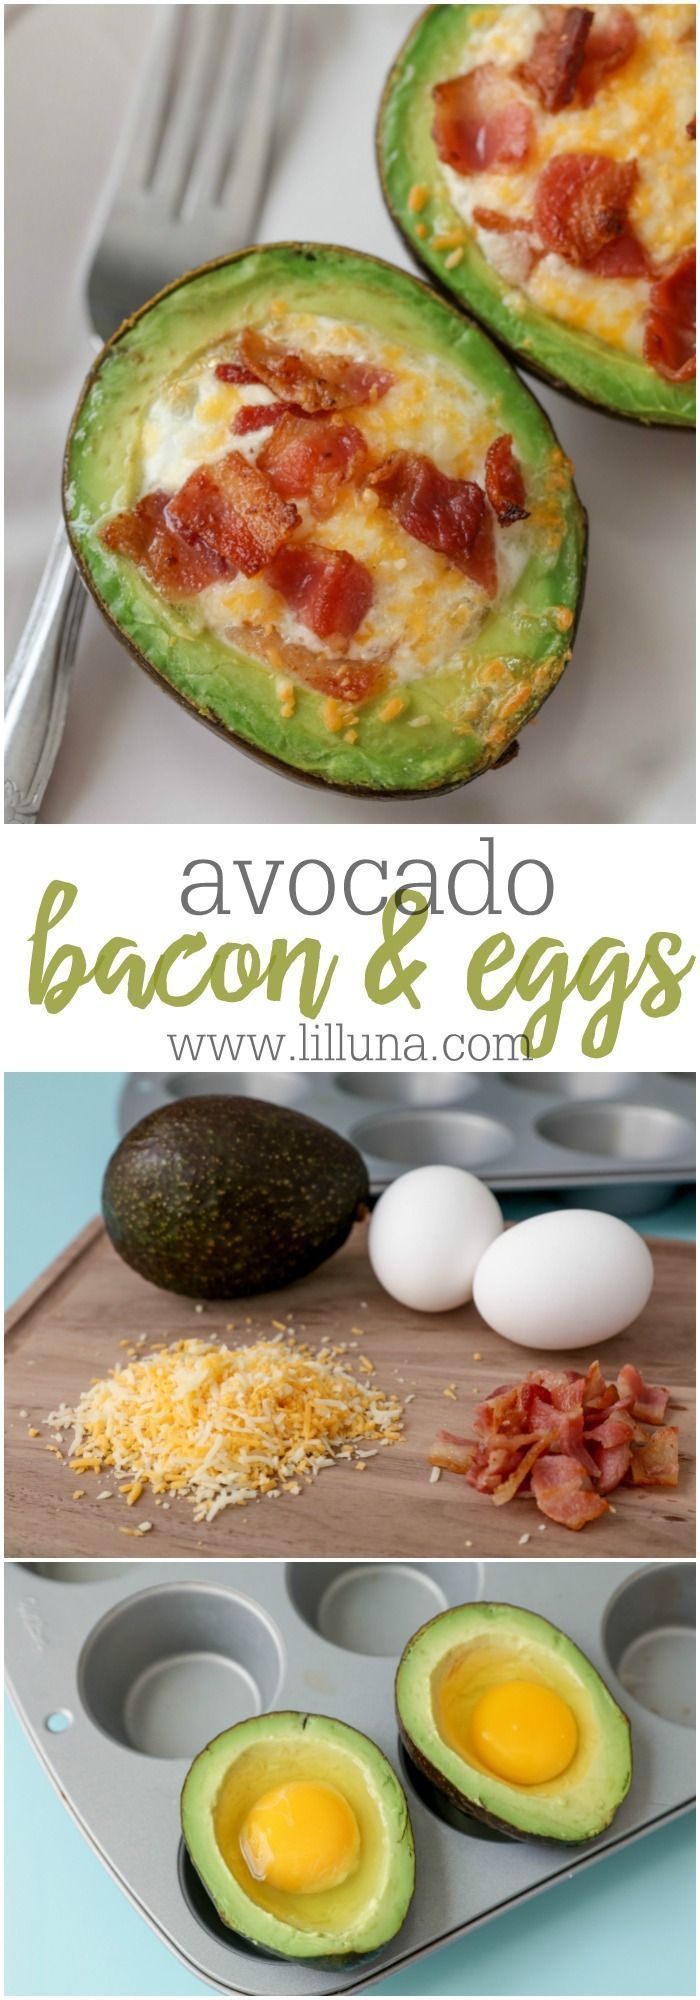 Avocado Bacon and eggs – one of our favorite breakfast recipes. They’re topped with cheese and so delicious!